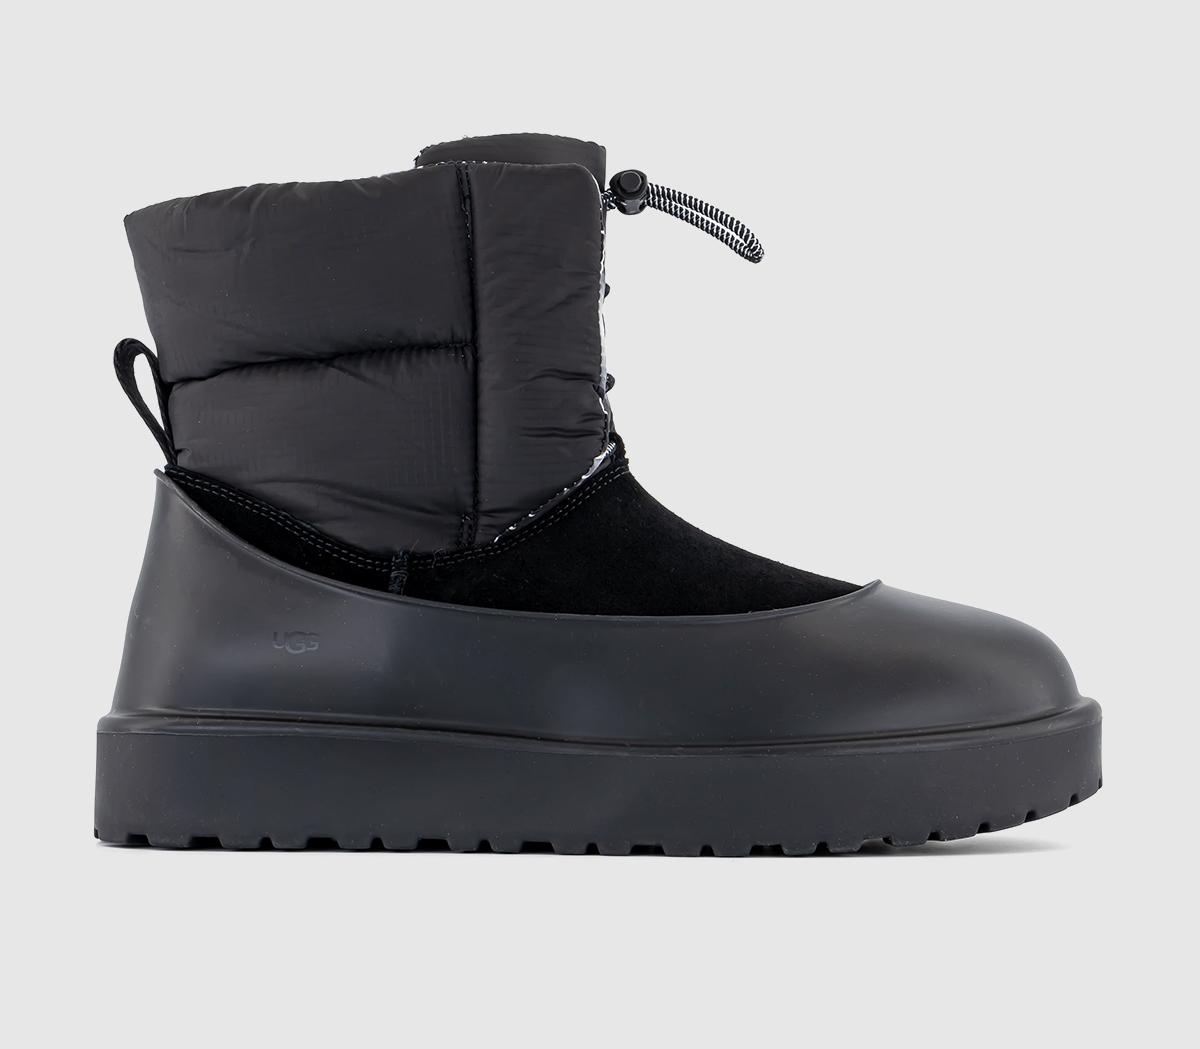 UGG Classic Maxi Toggle Boots Black - Women's Ankle Boots